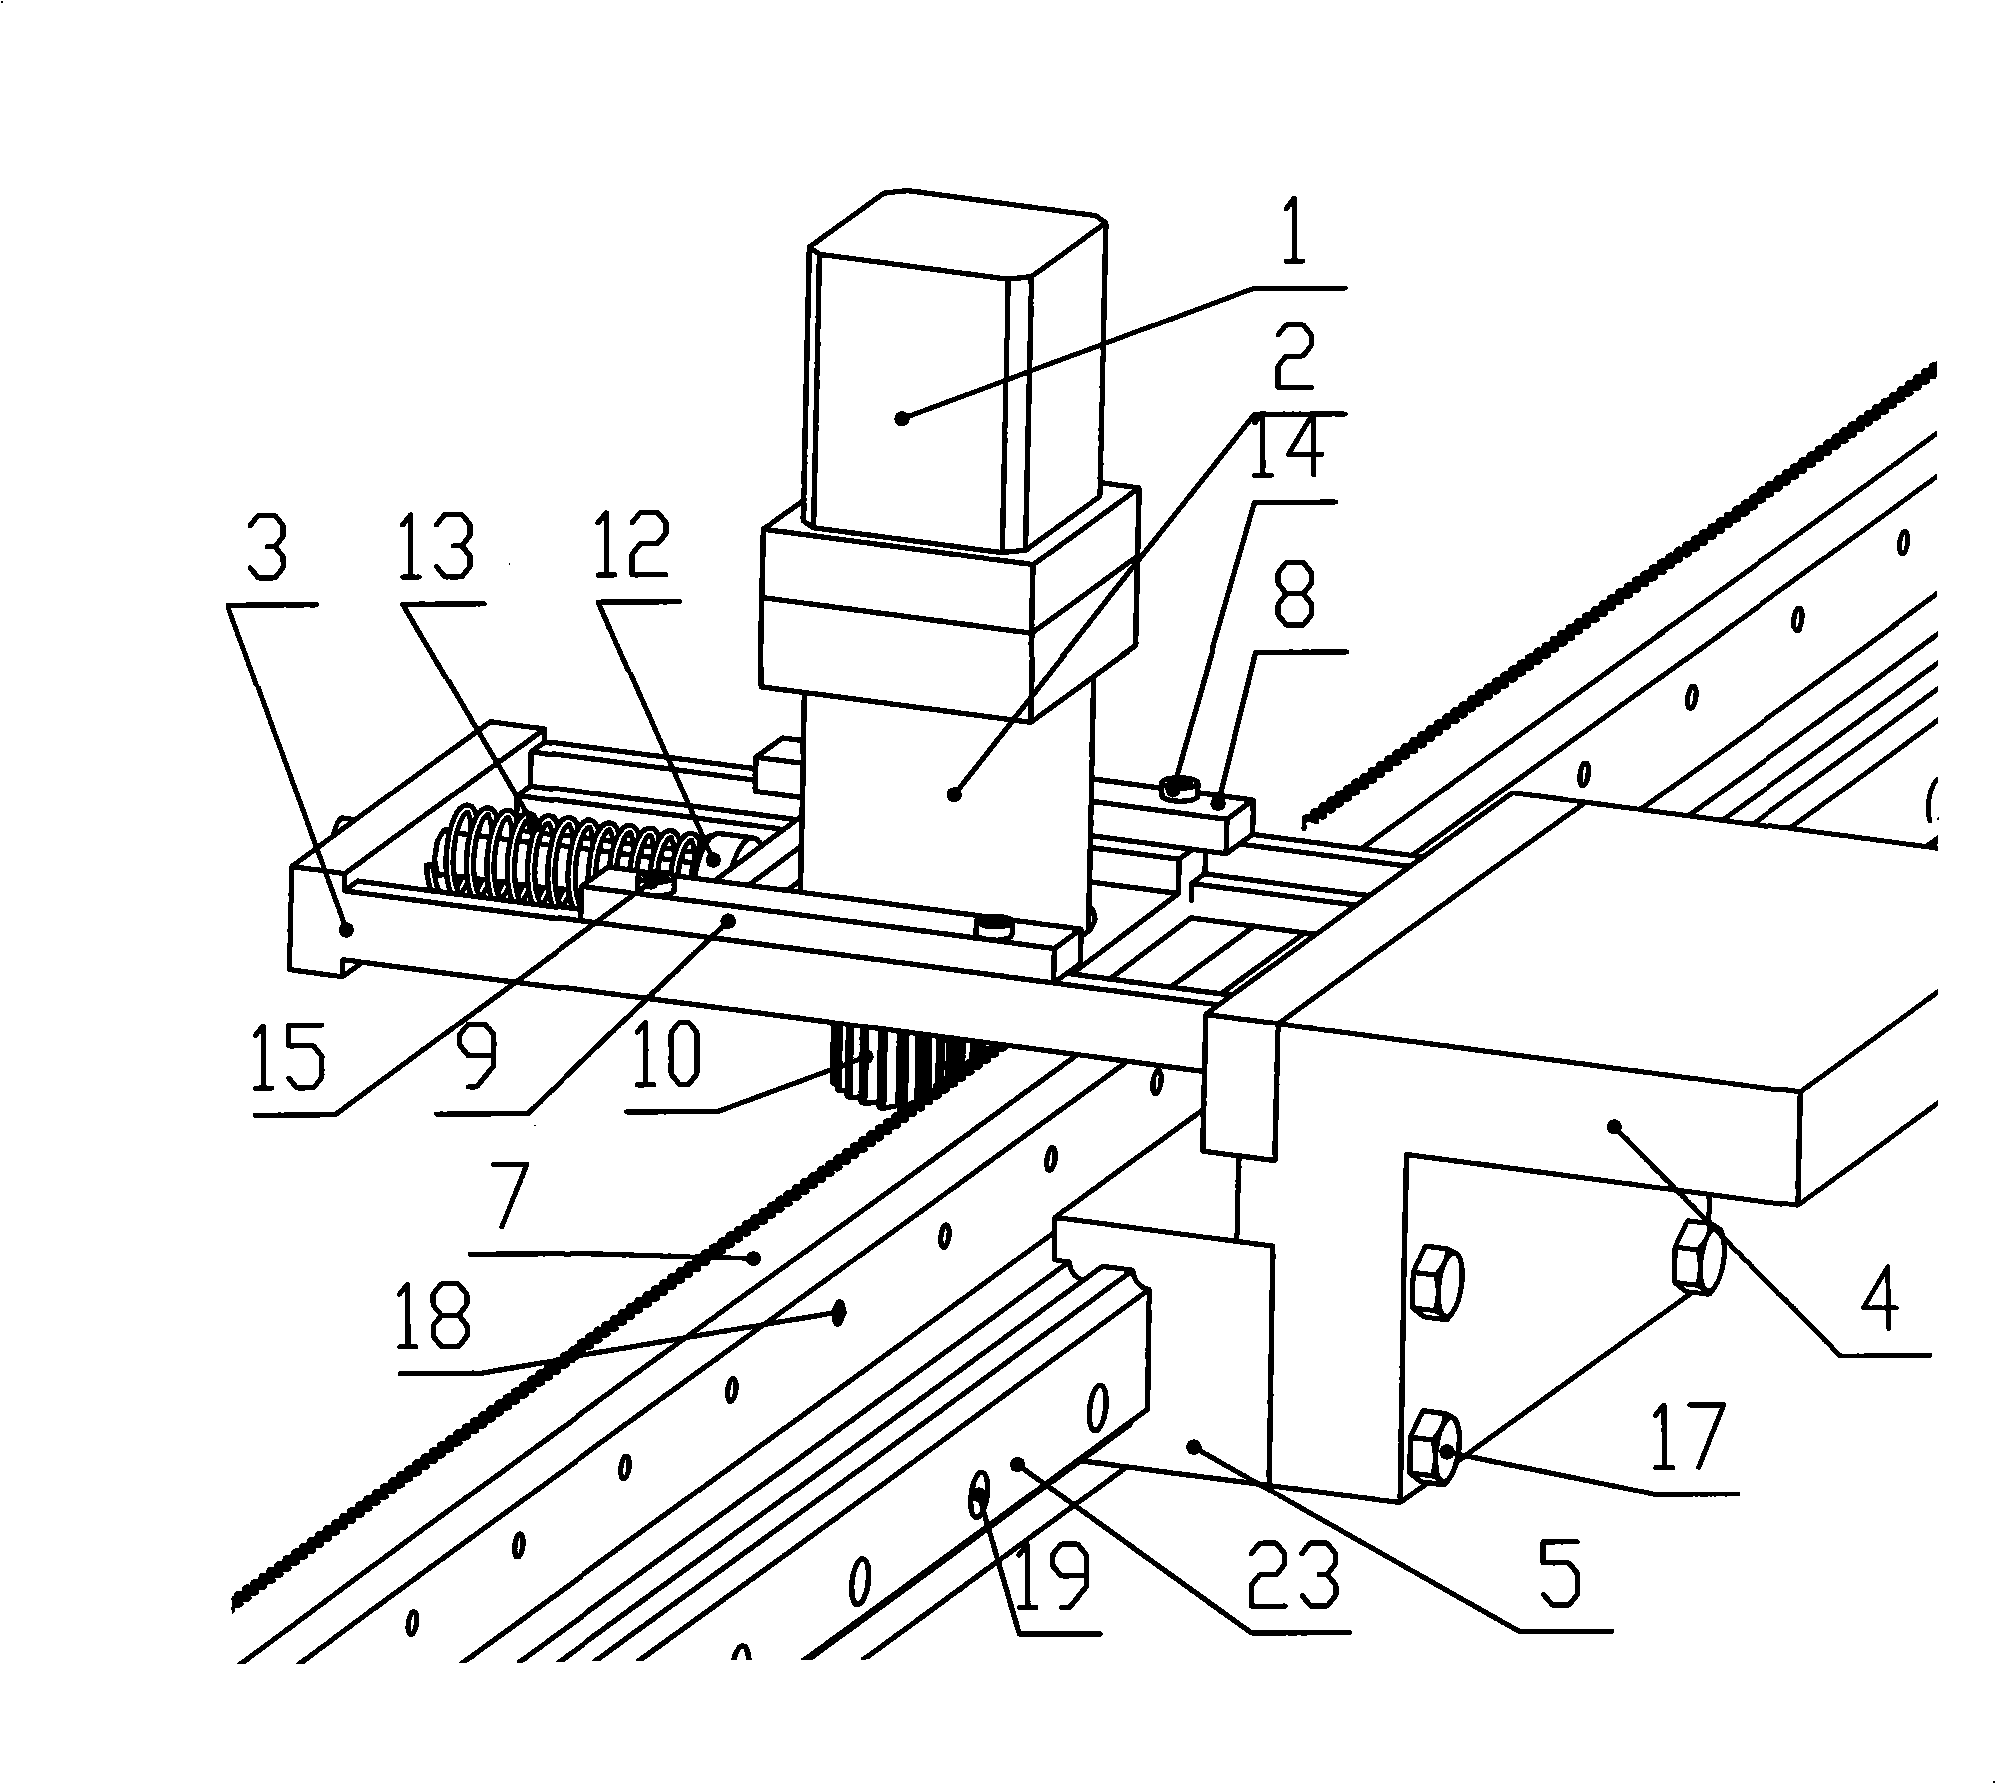 Slide block mechanism for reducing transmission backlash of rack and pinion